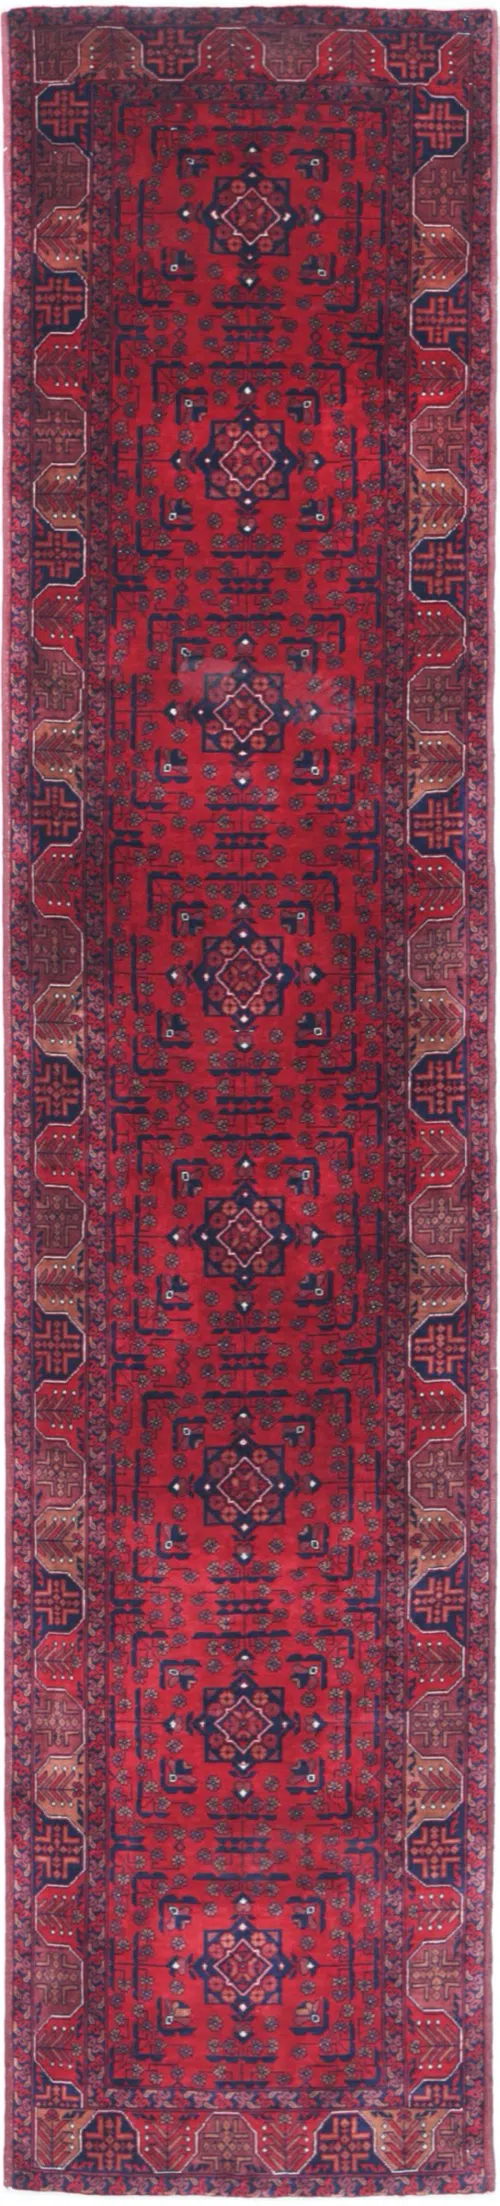 364409 Hand-Knotted Wool Rug eCarpet Gallery Area Rug for Living Room Bedroom Finest Khal Mohammadi Bordered Red Rug 5'10 x 7'10 